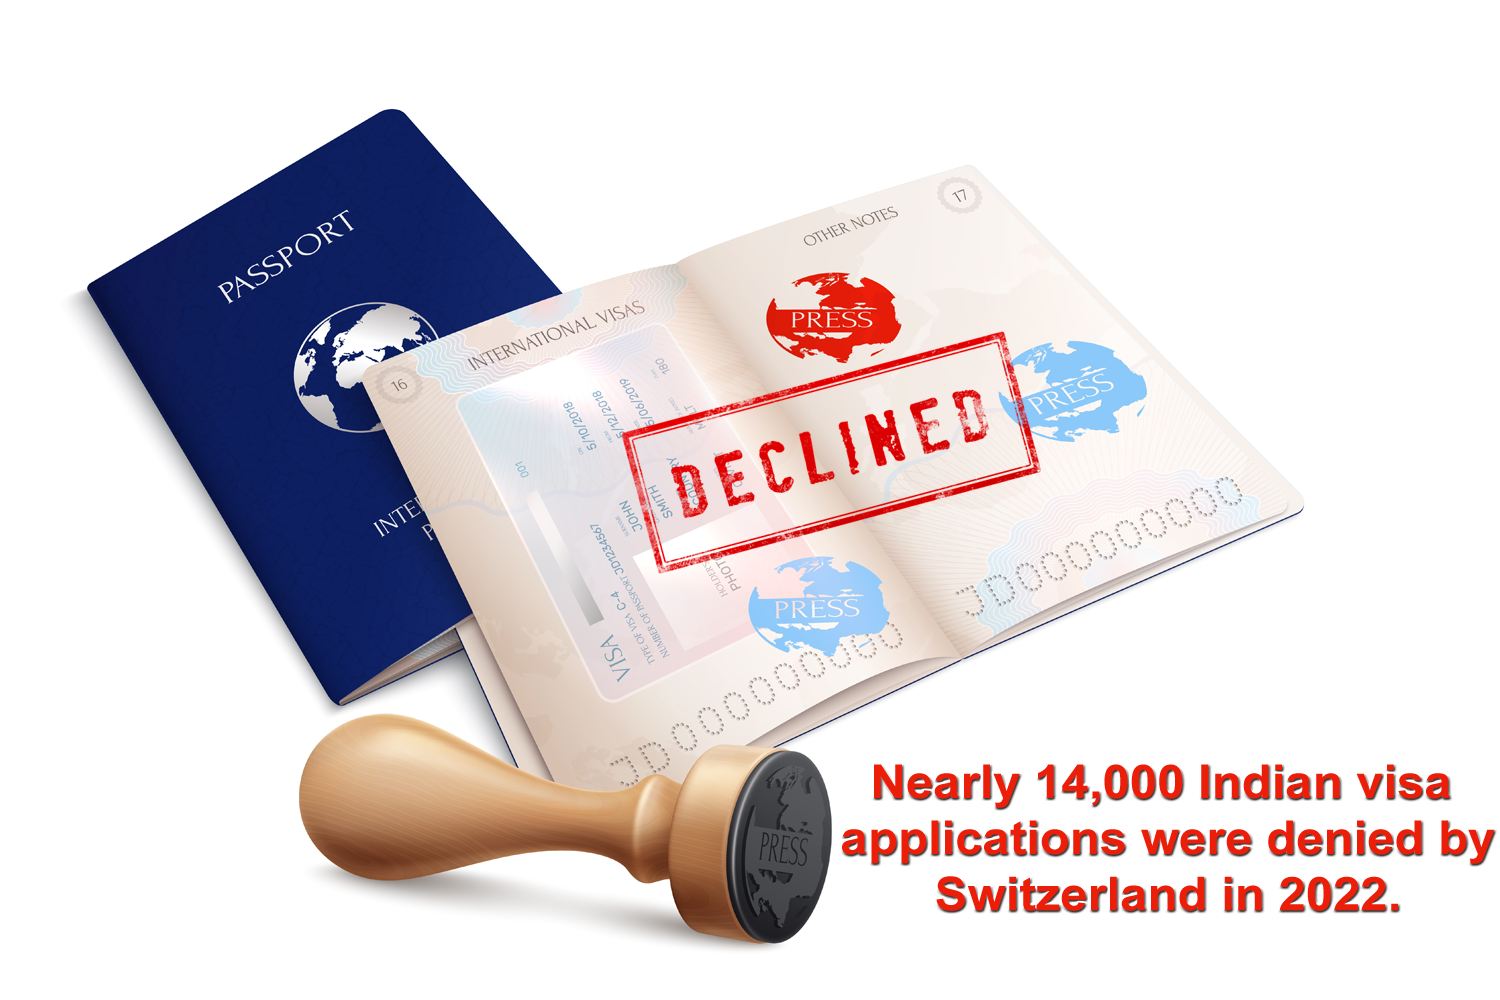 Nearly 14,000 Indian visa applications were denied by Switzerland in 2022.